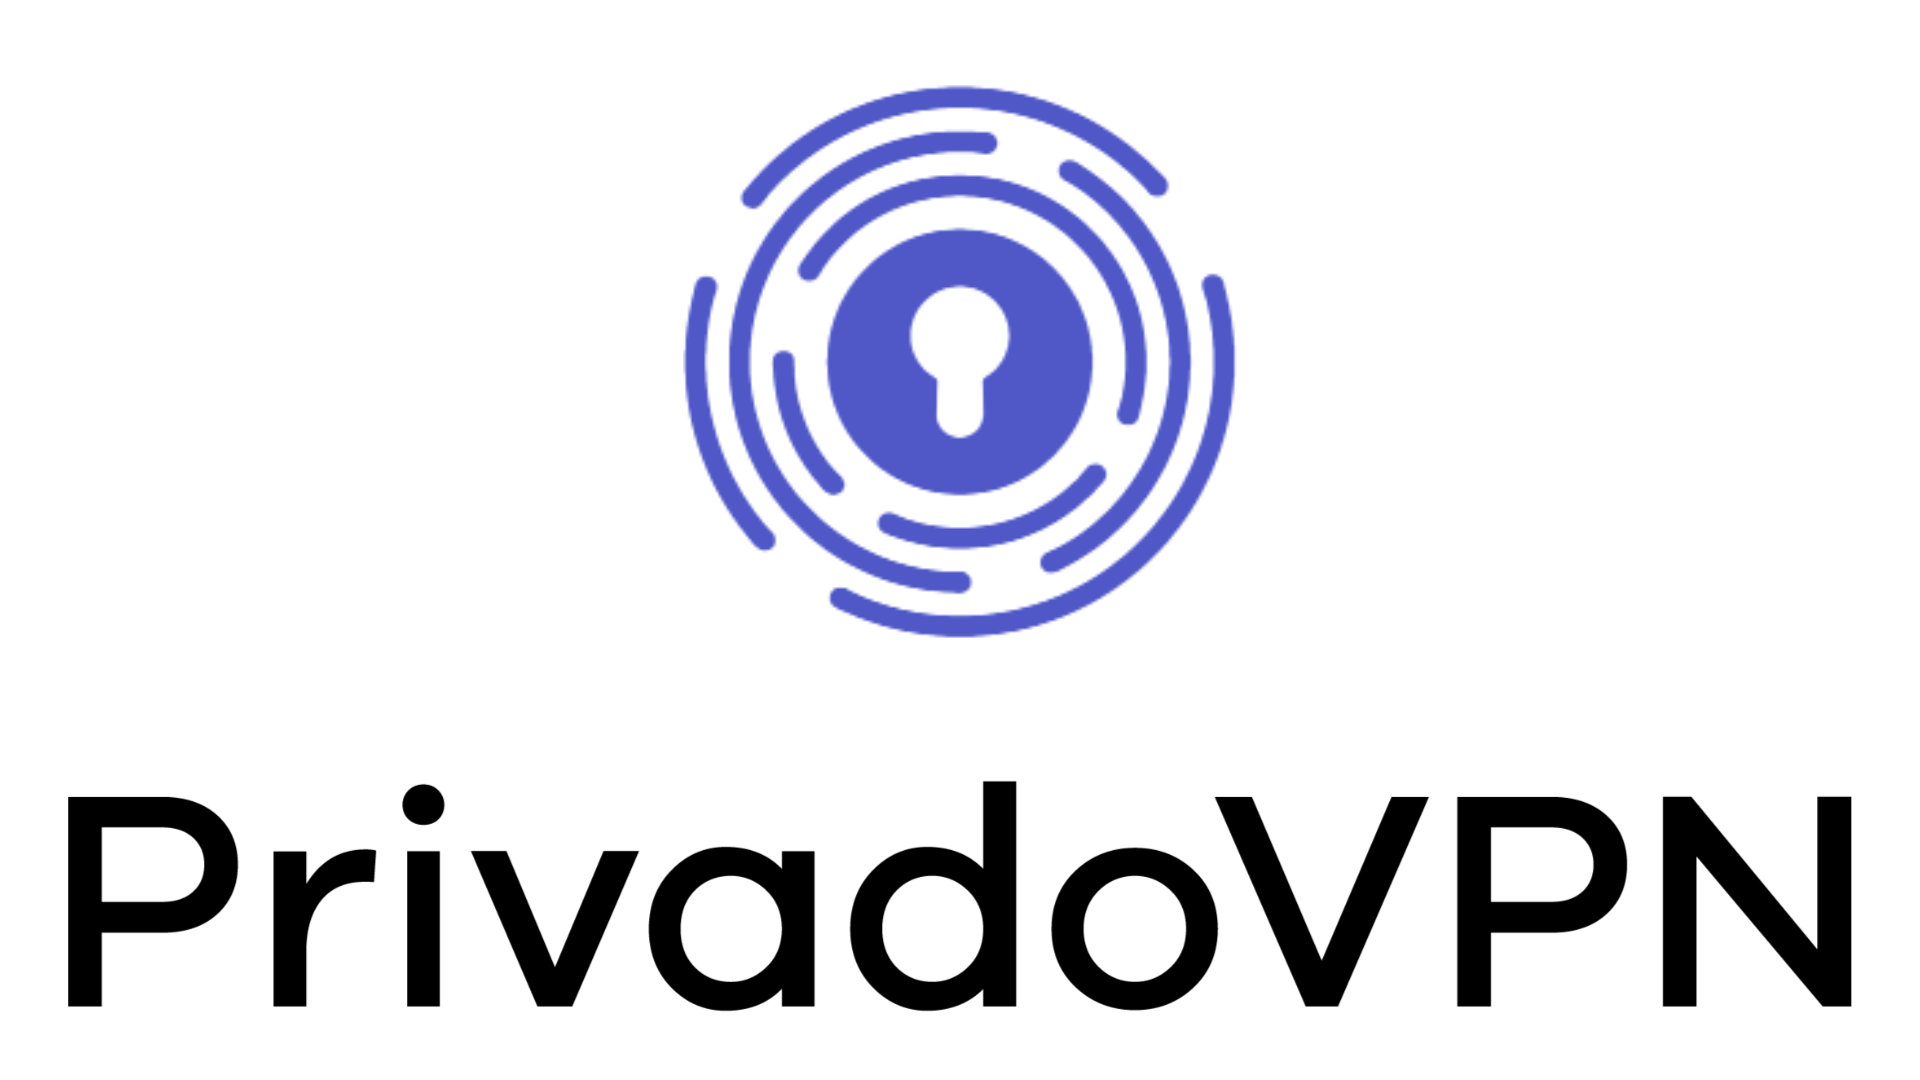 VPN costs for PrivadoVPN. Image shows the company logo.